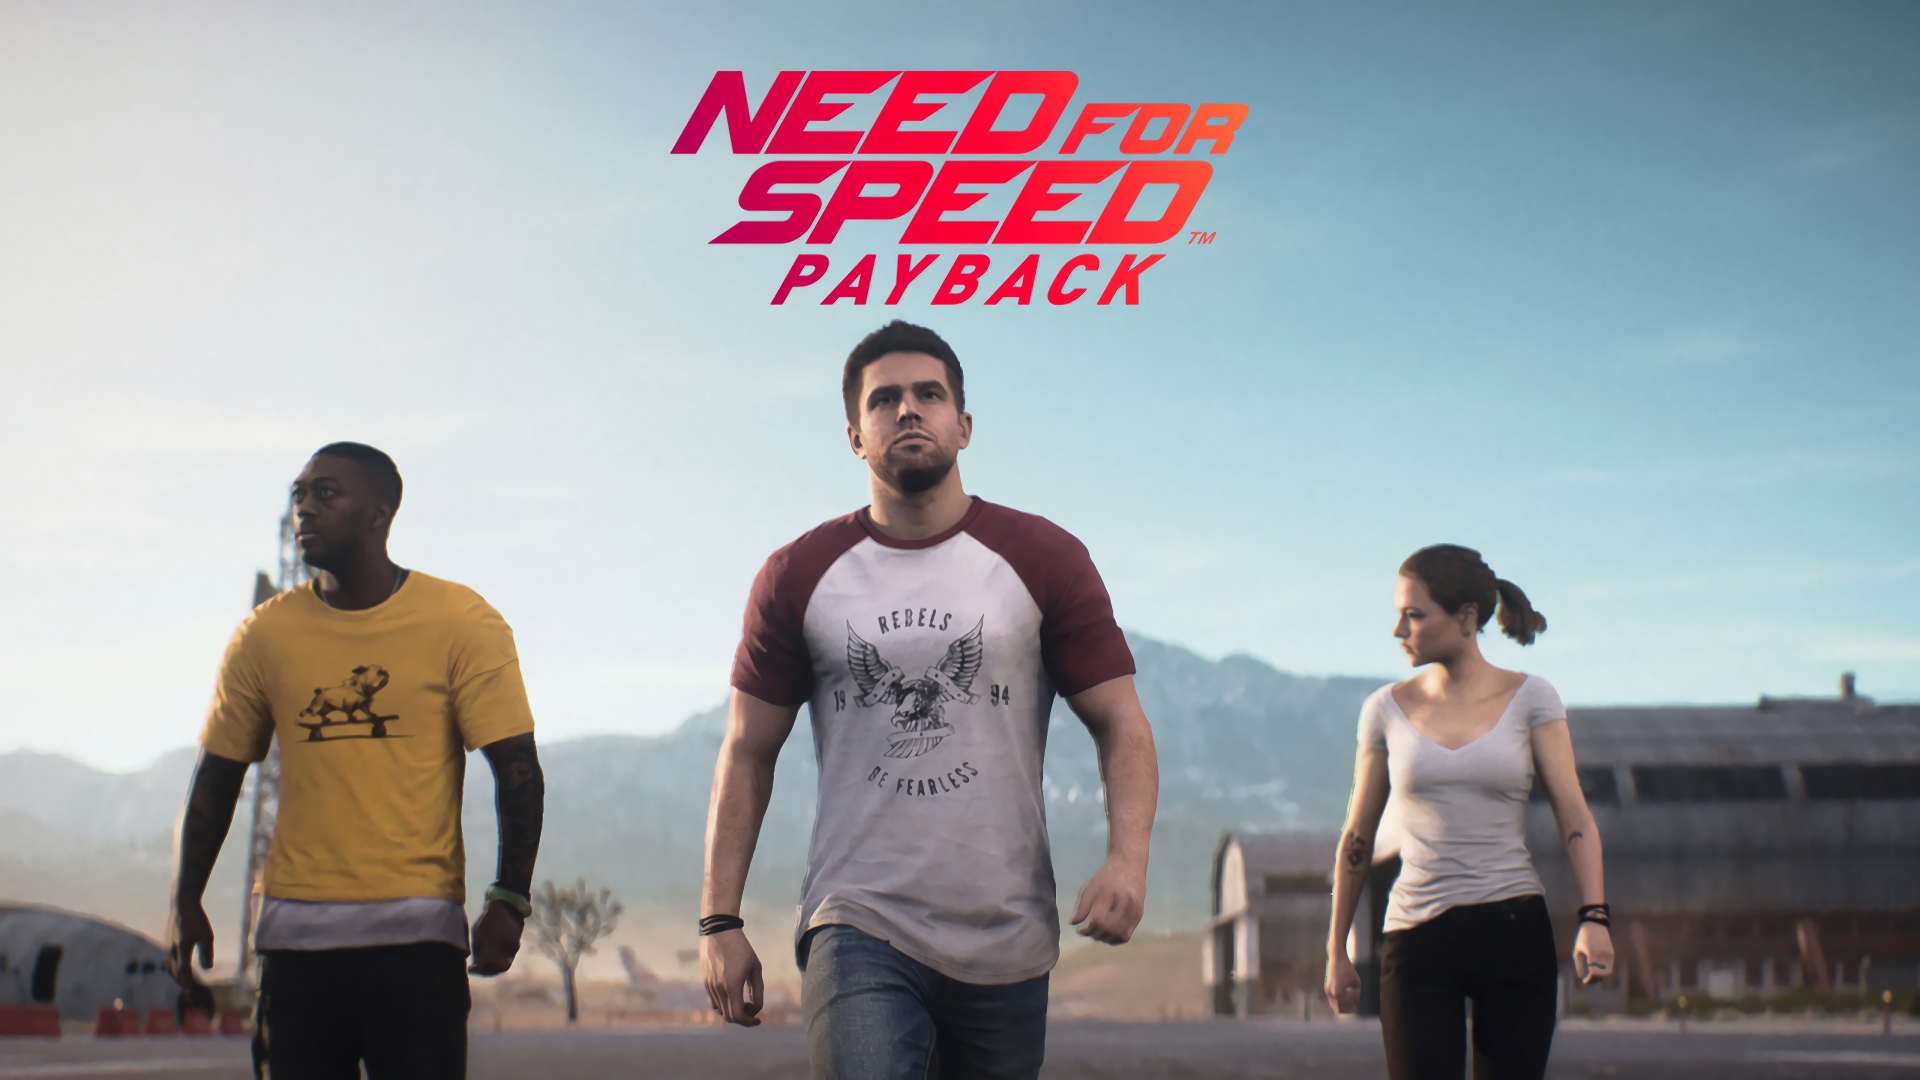 Jessica Miller Need For Speed Need For Speed Payback Sean Mcalister Tyler Morgan 1920x1080